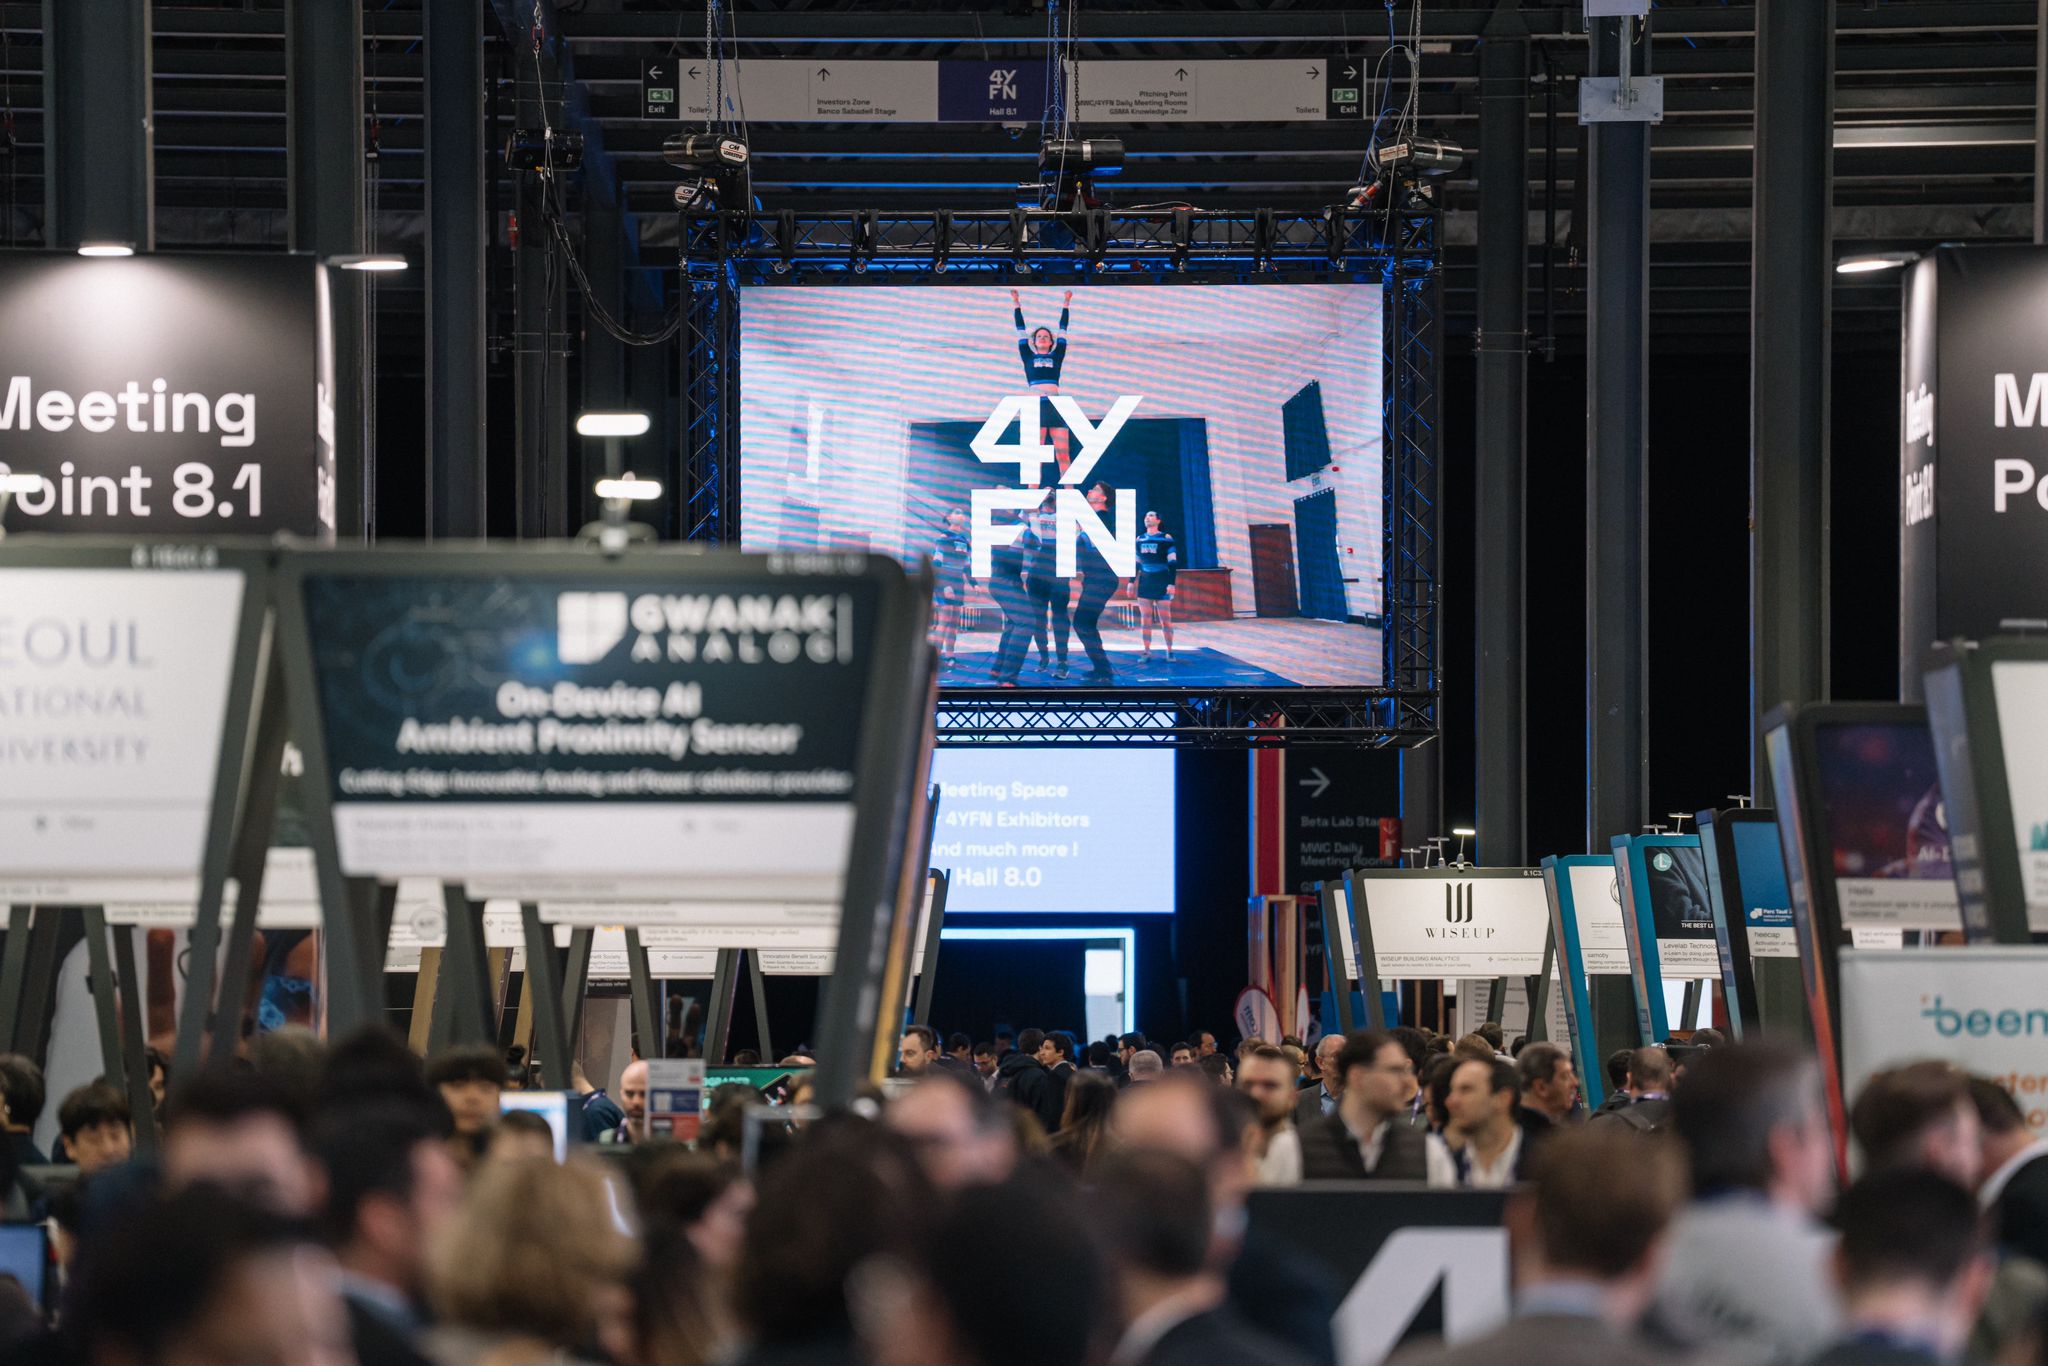 MWCapital brings the best startups resulting from technology transfer to 4YFN for the first time